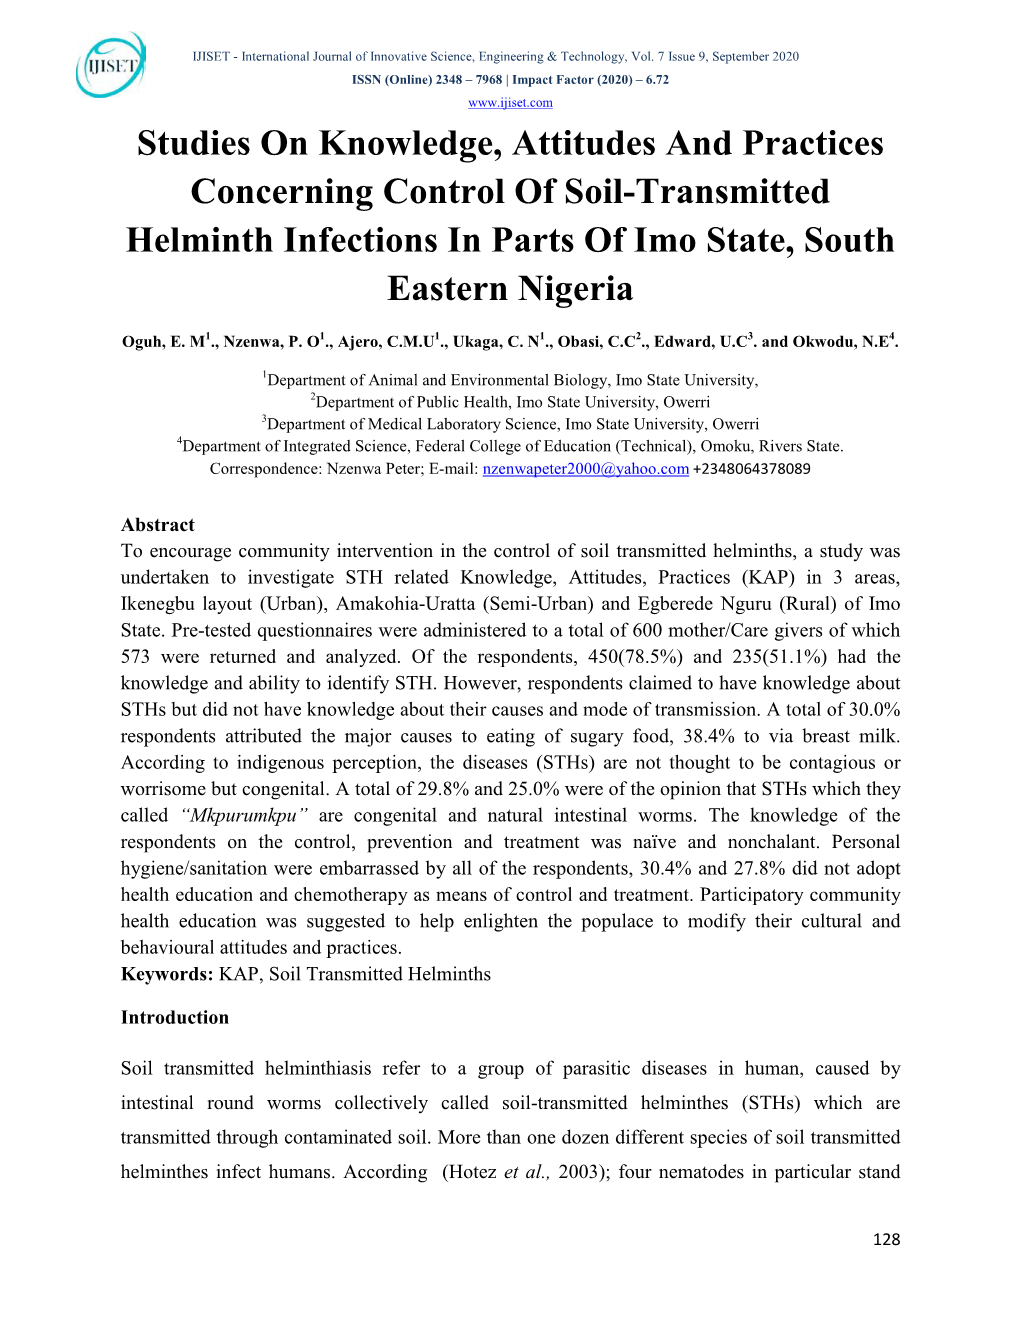 Studies on Knowledge, Attitudes and Practices Concerning Control of Soil-Transmitted Helminth Infections in Parts of Imo State, South Eastern Nigeria